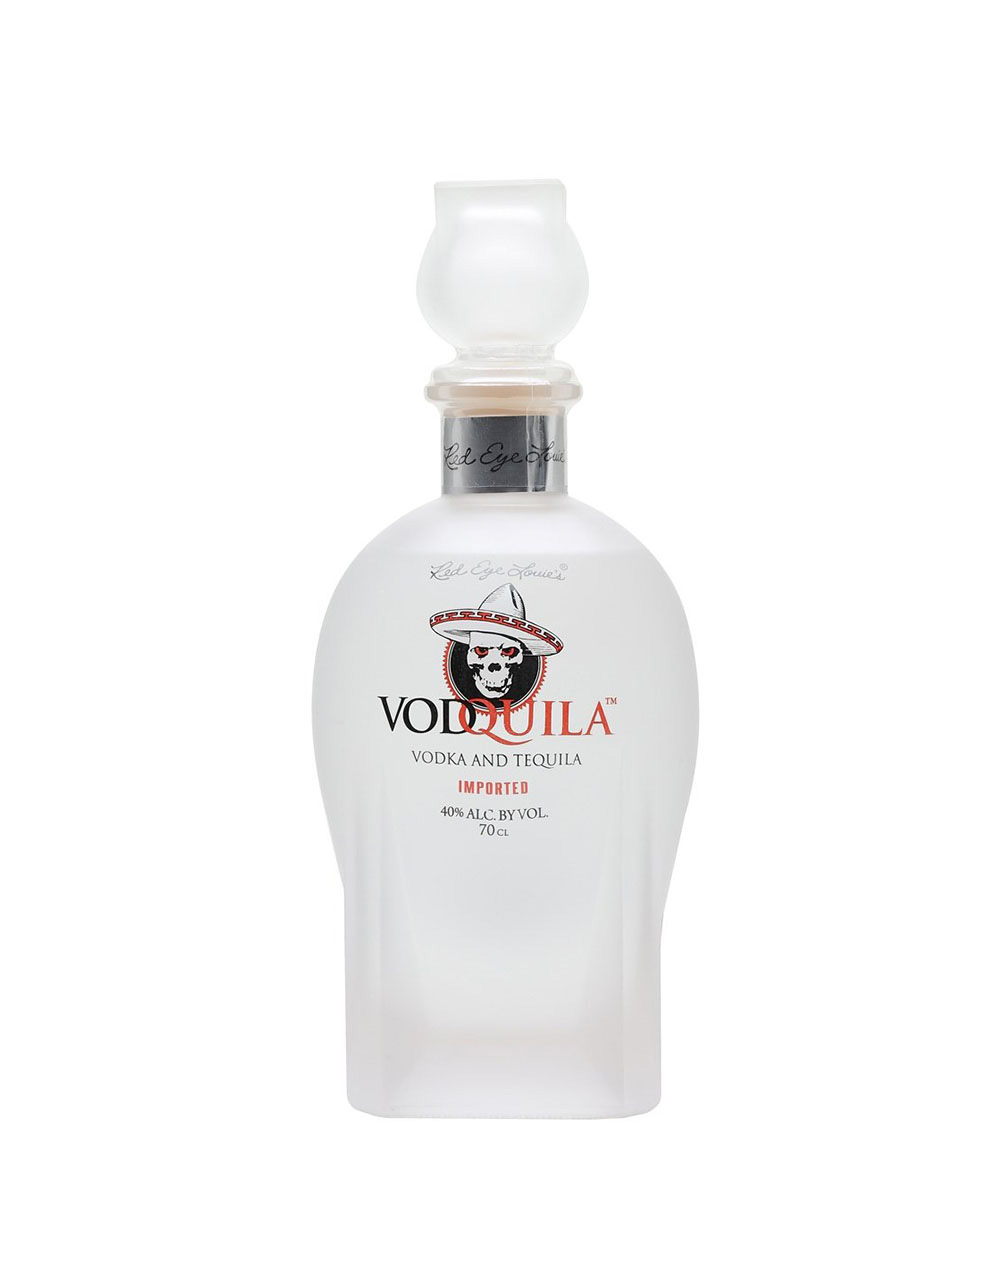 Vodquila Red Eye Louie's